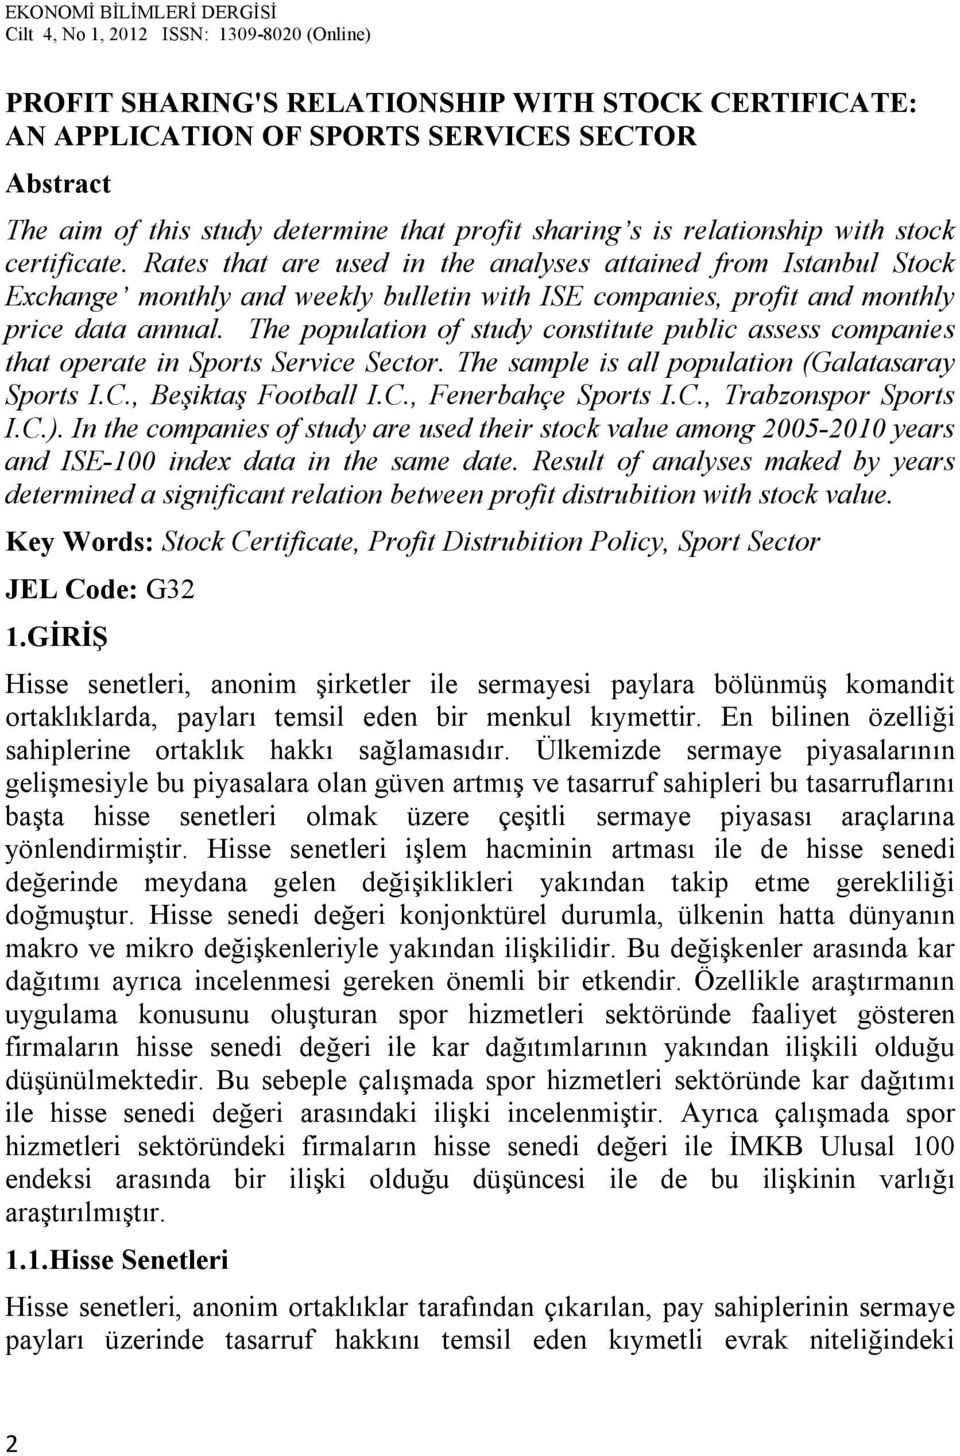 The population of study constitute public assess companies that operate in Sports Service Sector. The sample is all population (Galatasaray Sports I.C., Beşiktaş Football I.C., Fenerbahçe Sports I.C., Trabzonspor Sports I.